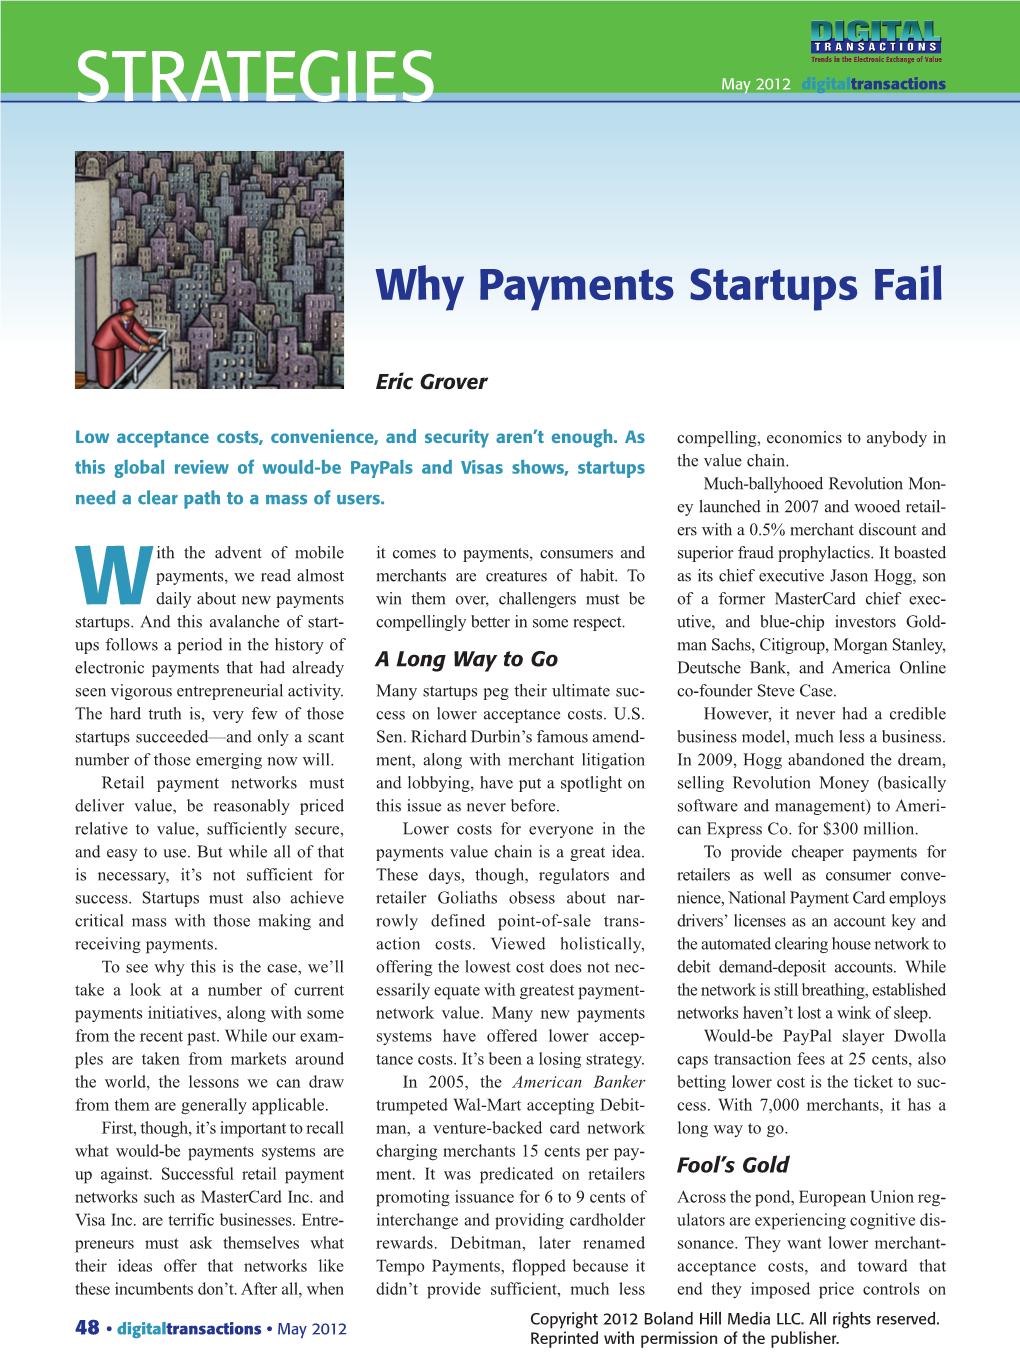 Why Payments Startups Fail